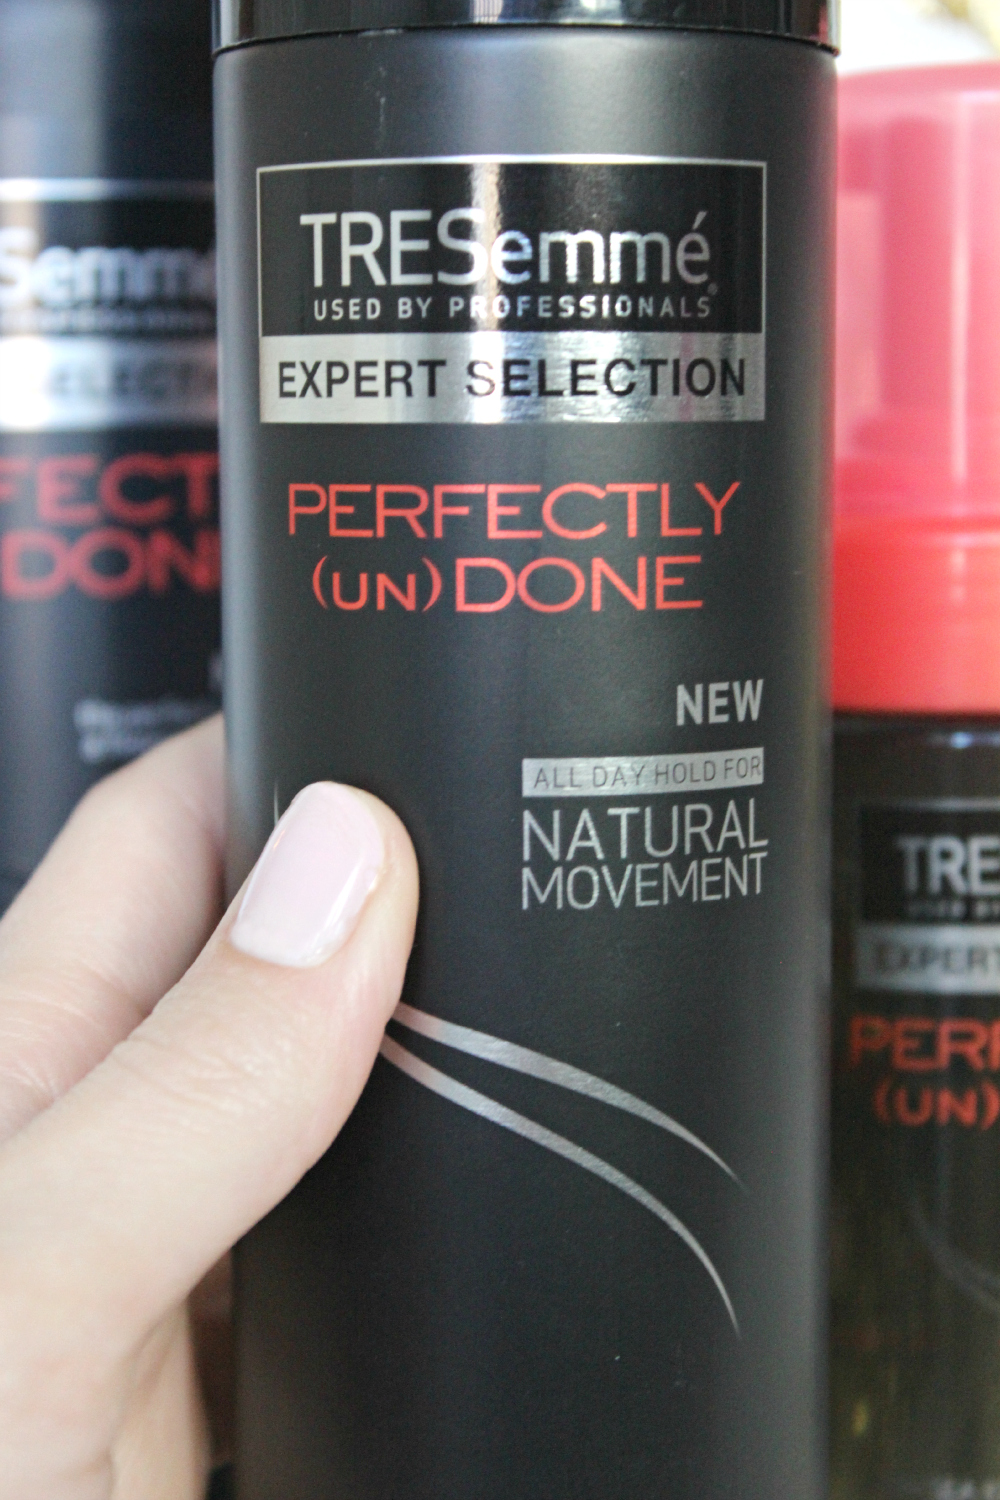 TRESemme, TRESemme Perfectly Undone, New Look, Holiday Beauty, Stephanie Ziajka, Diary of a Debutante